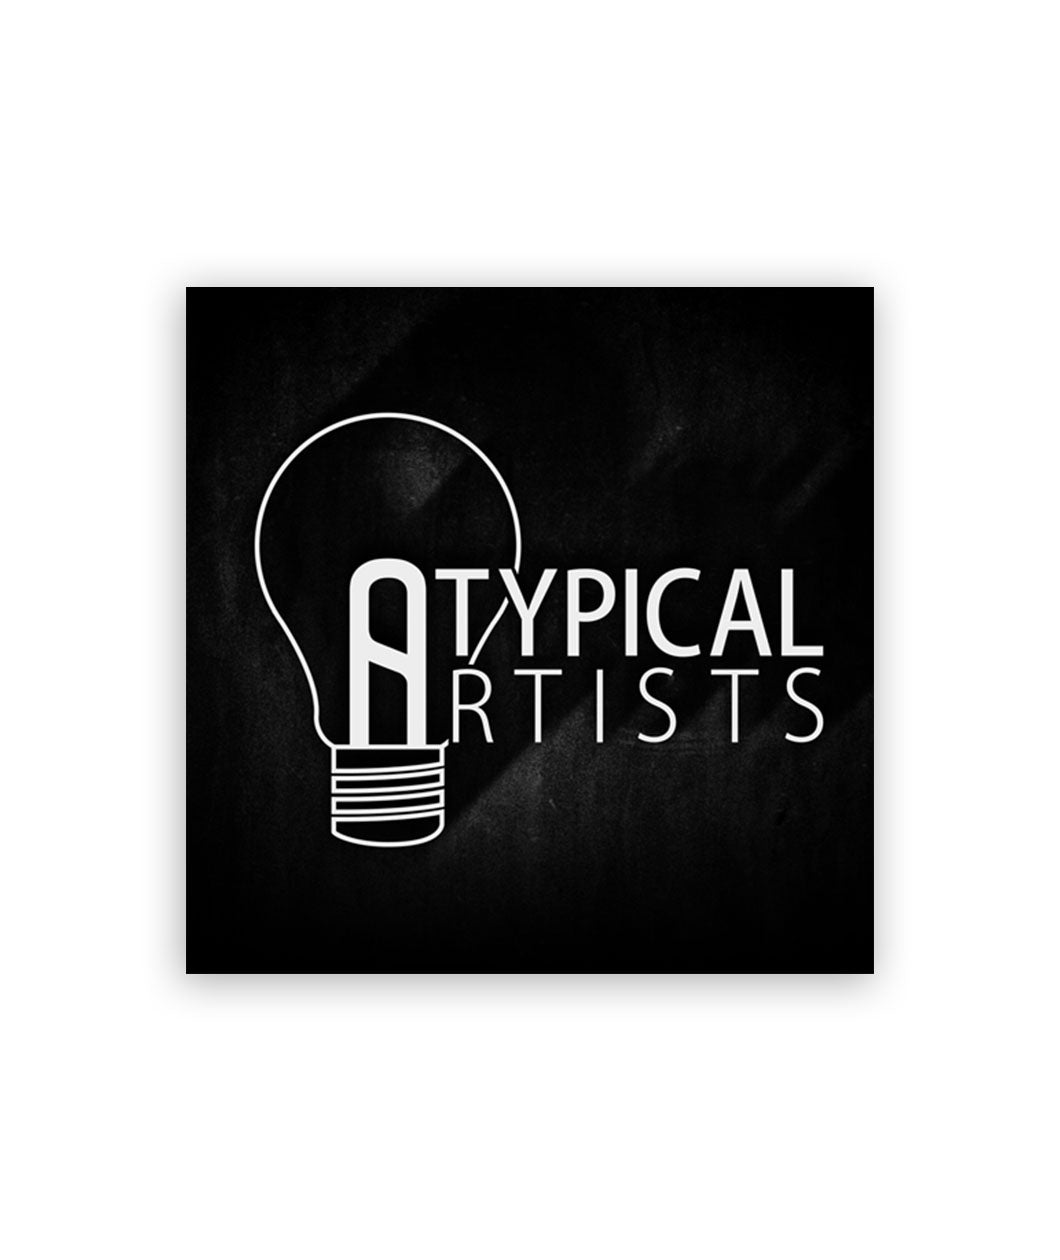 A album cover for the Atypical Artists theme music pack which is a black background with a white outline of a lightbulb and the words 